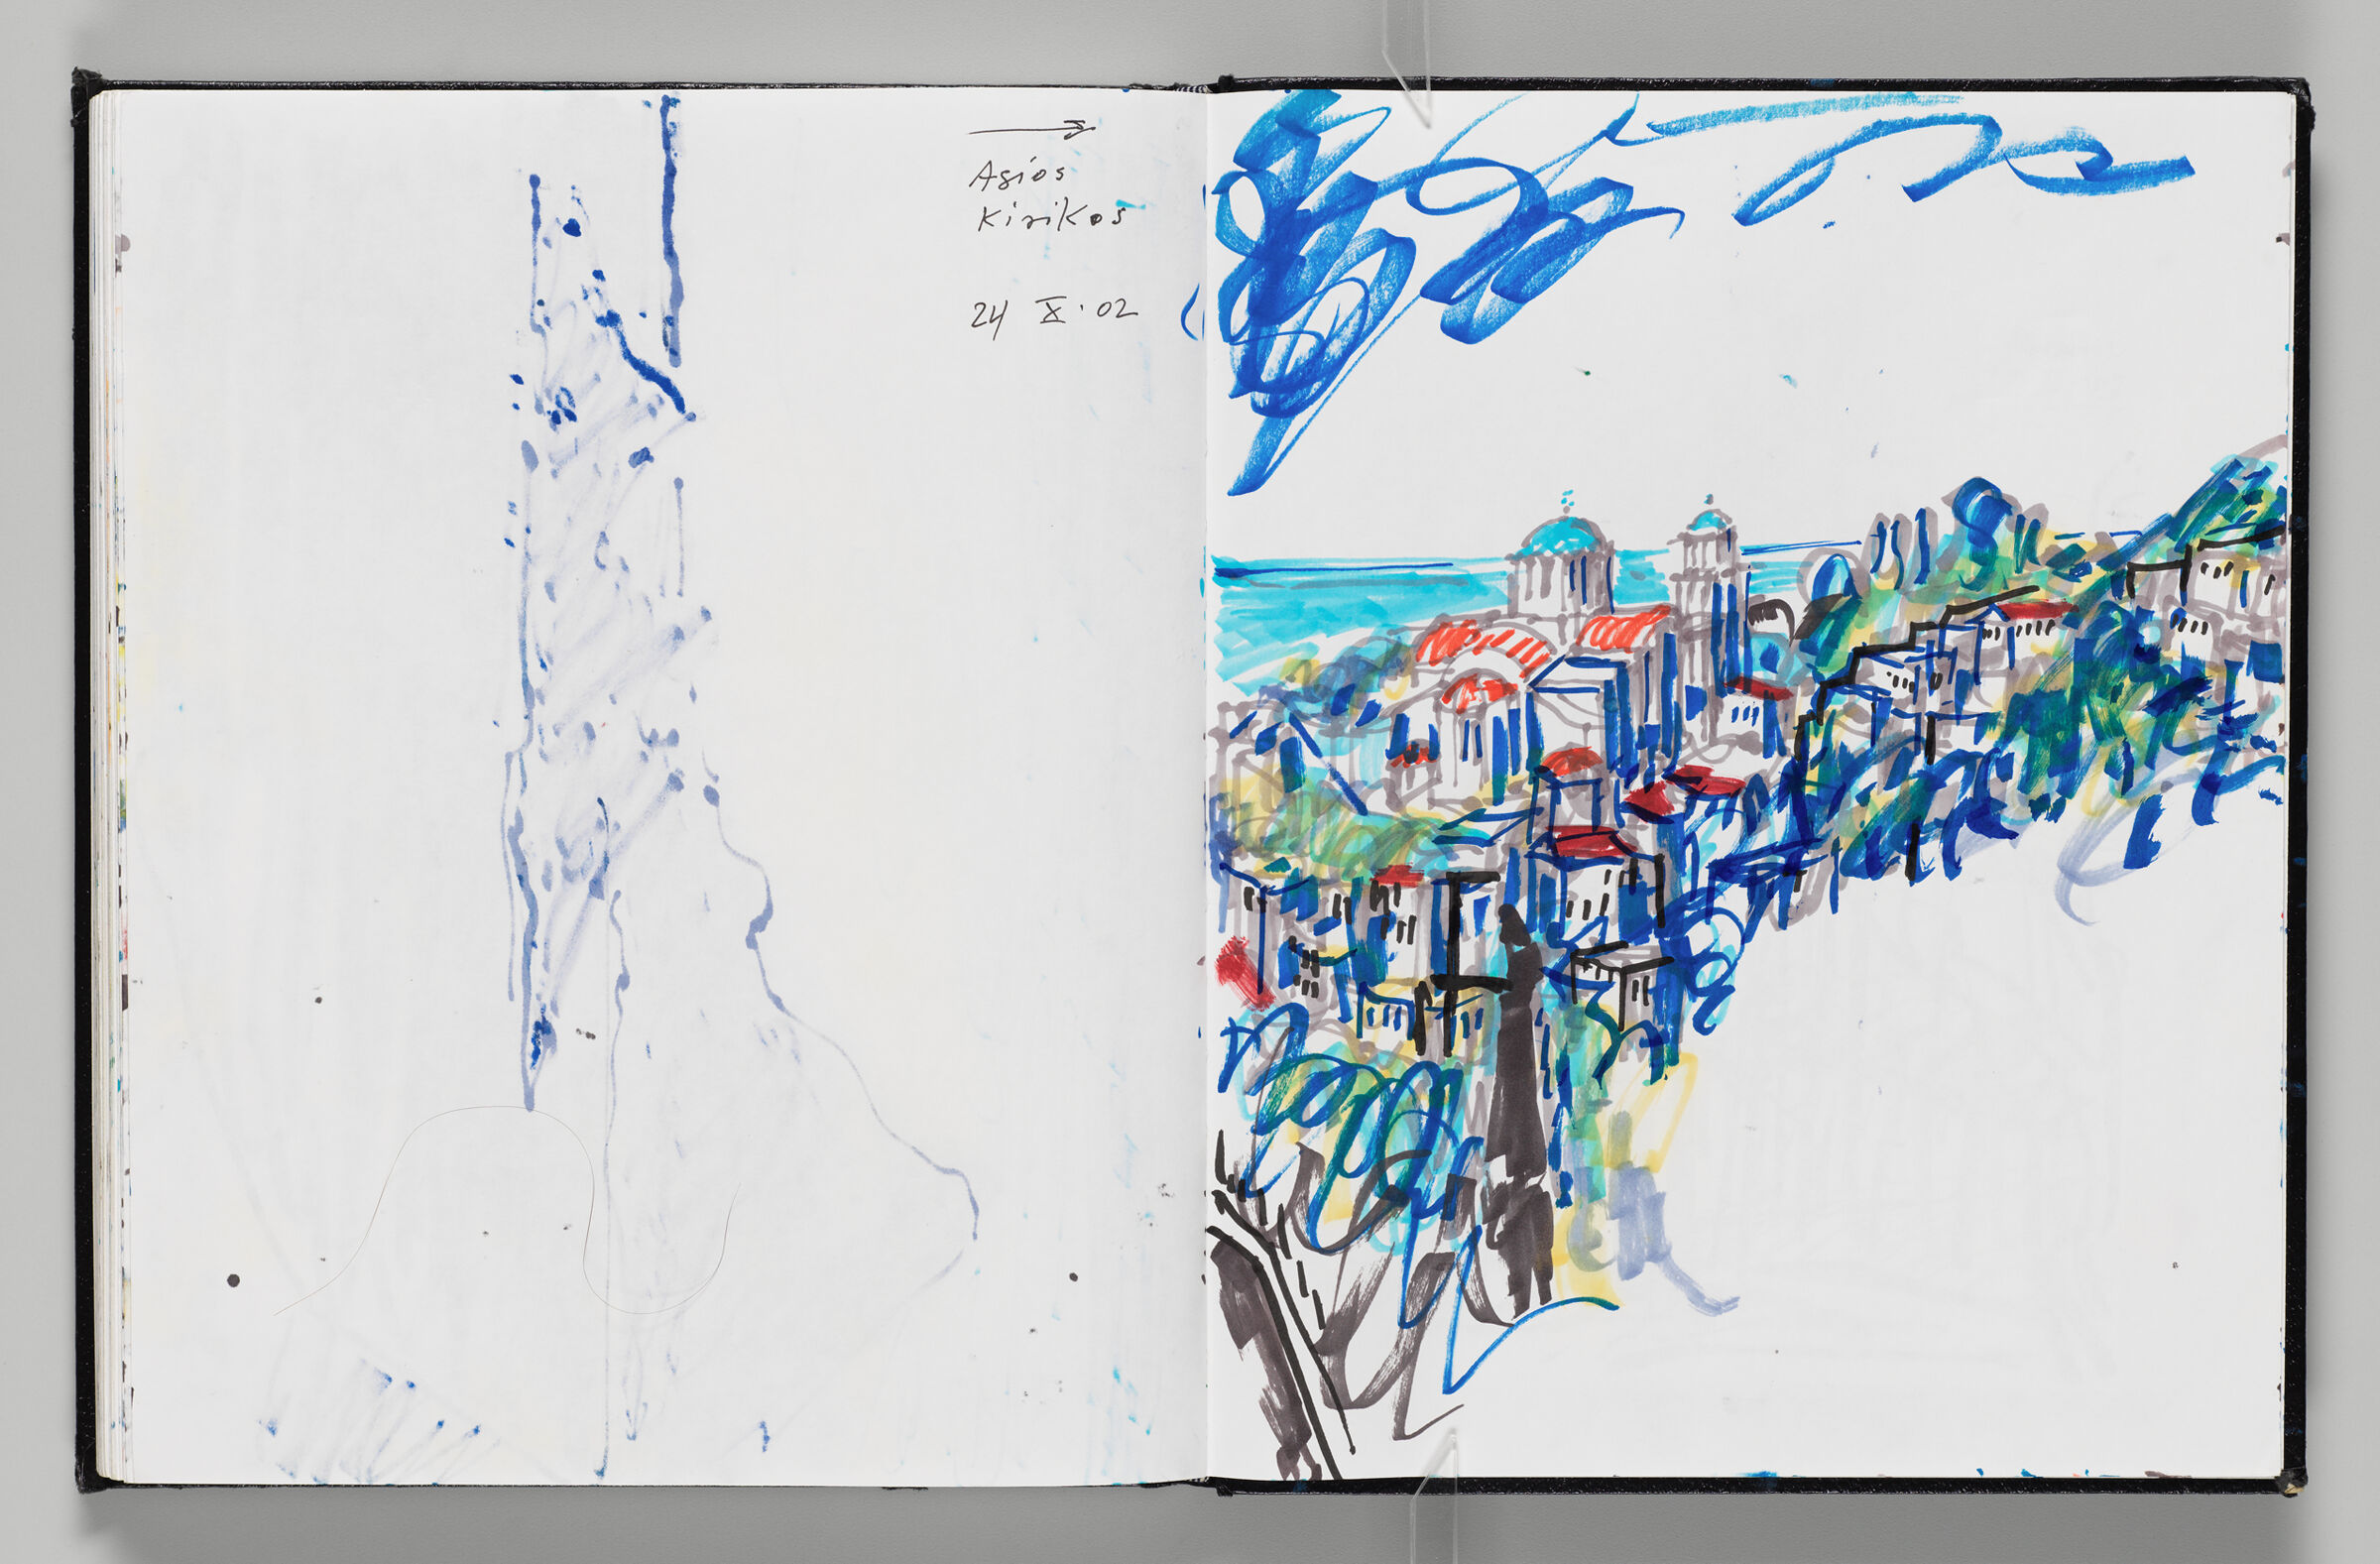 Untitled (Bleed-Through Of Previous Page, Left Page); Untitled (View Of Asios Kirikos, Right Page)